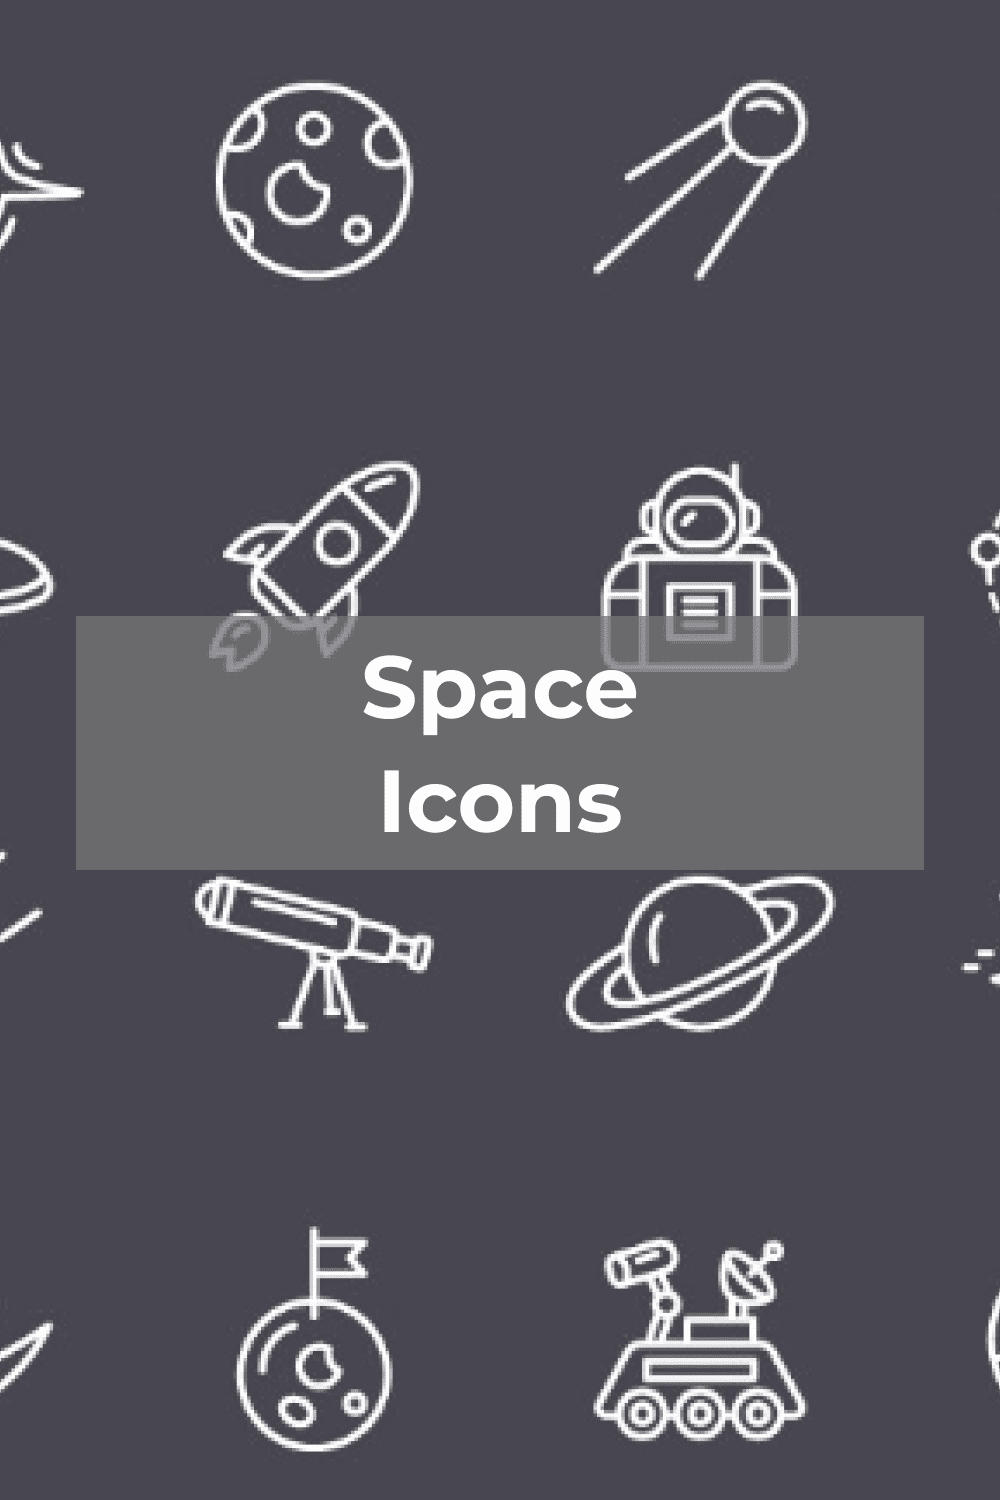 Launch your presentation to Space.